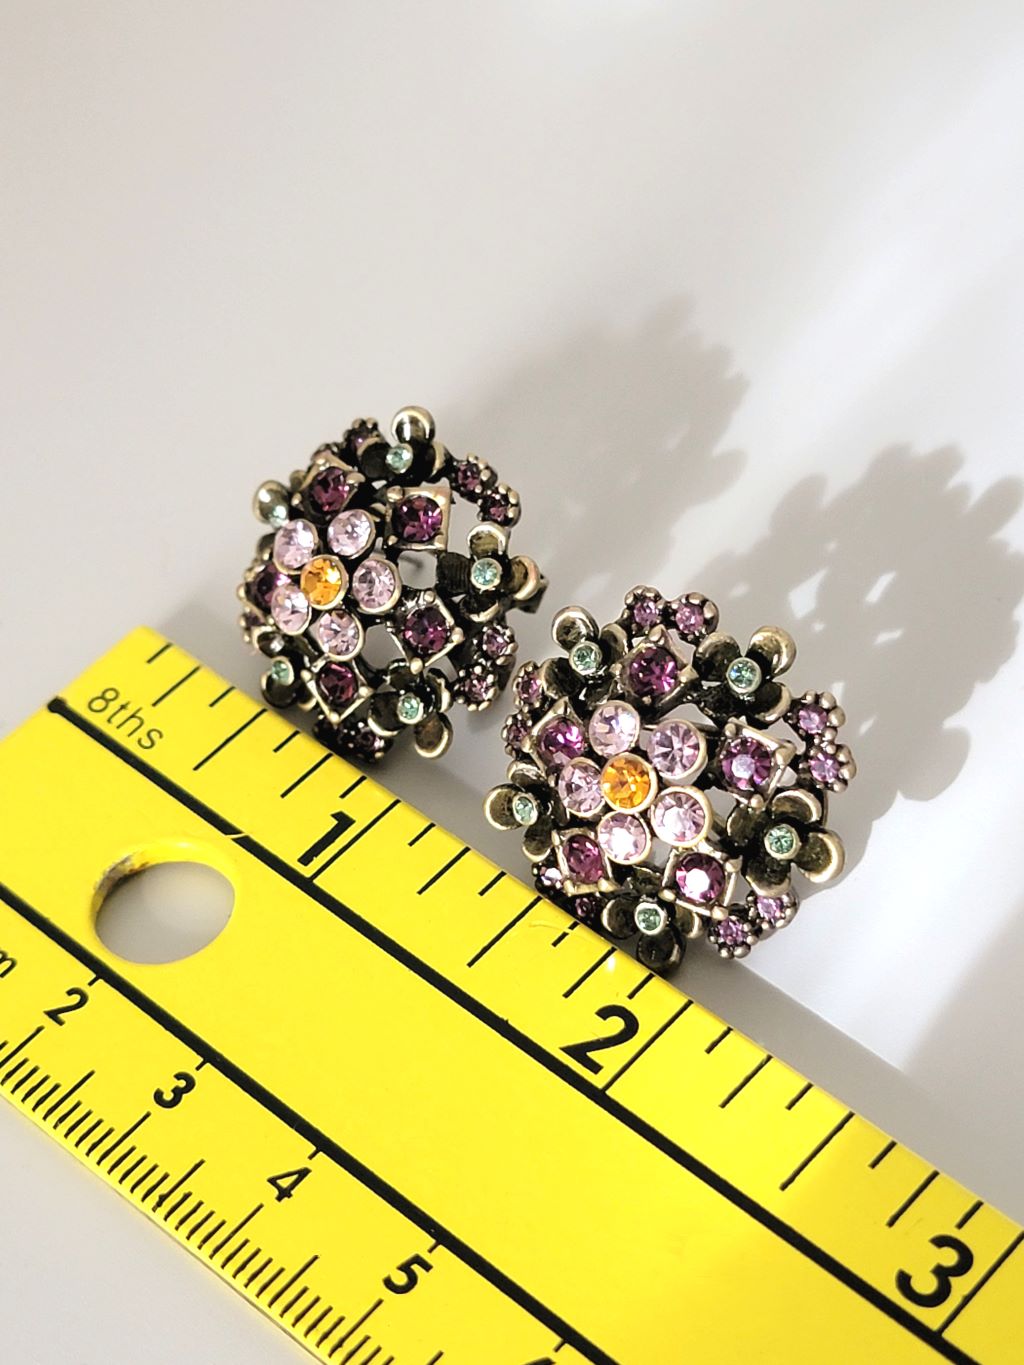 Rhinestone post earrings, in floral settings, with jewel tone crystals, next to a ruler.